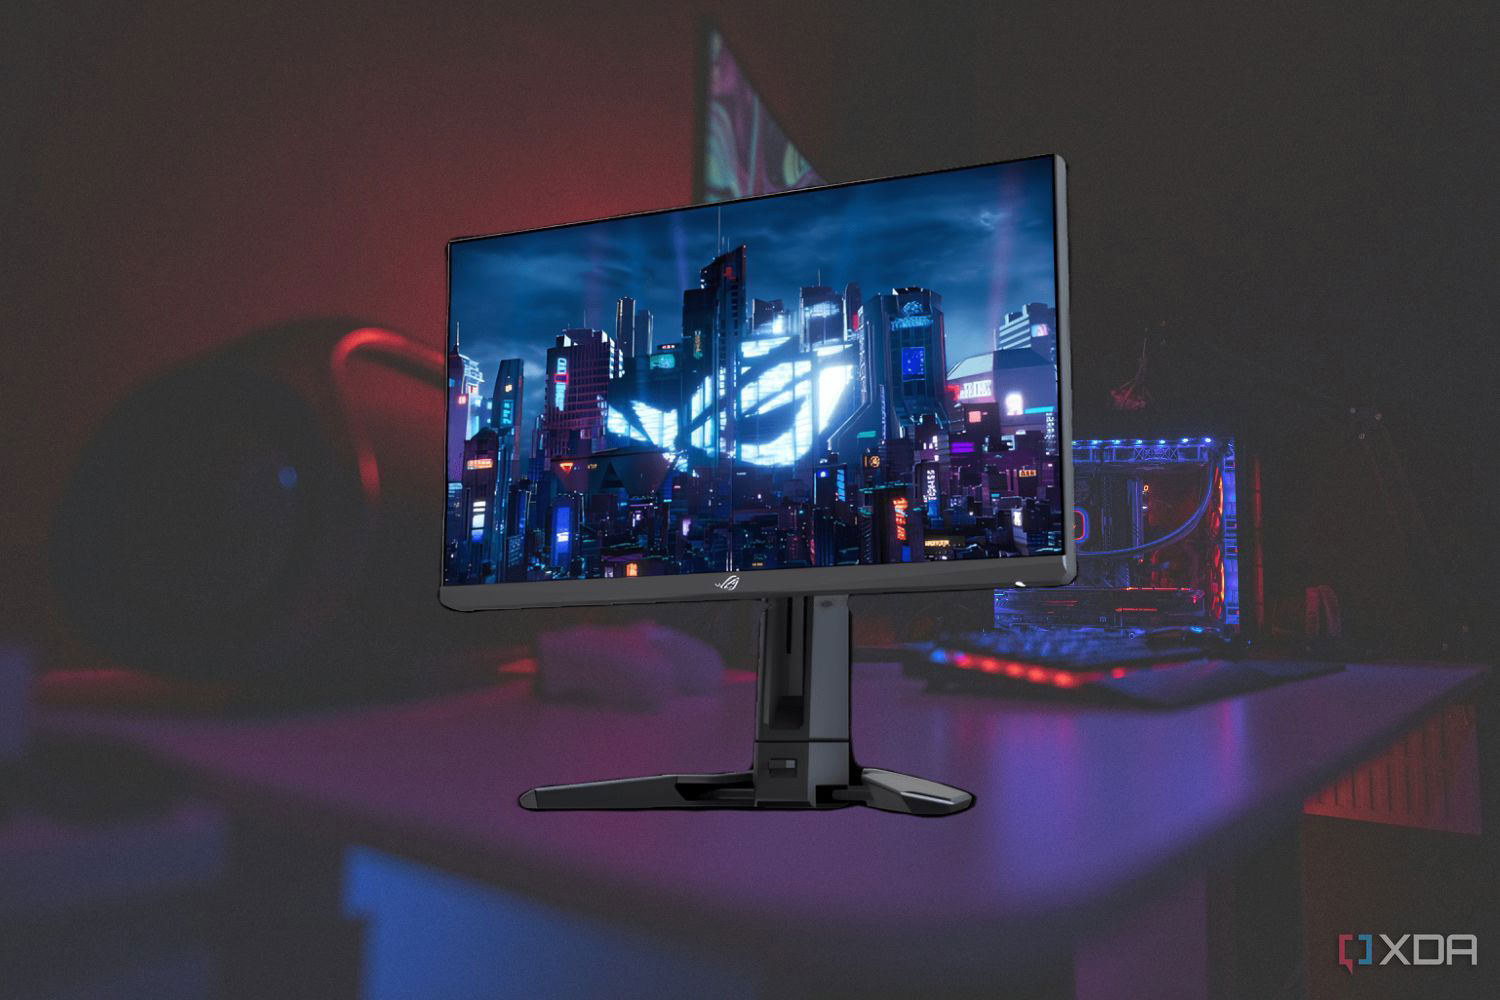 540Hz monitors are here, but should you care?